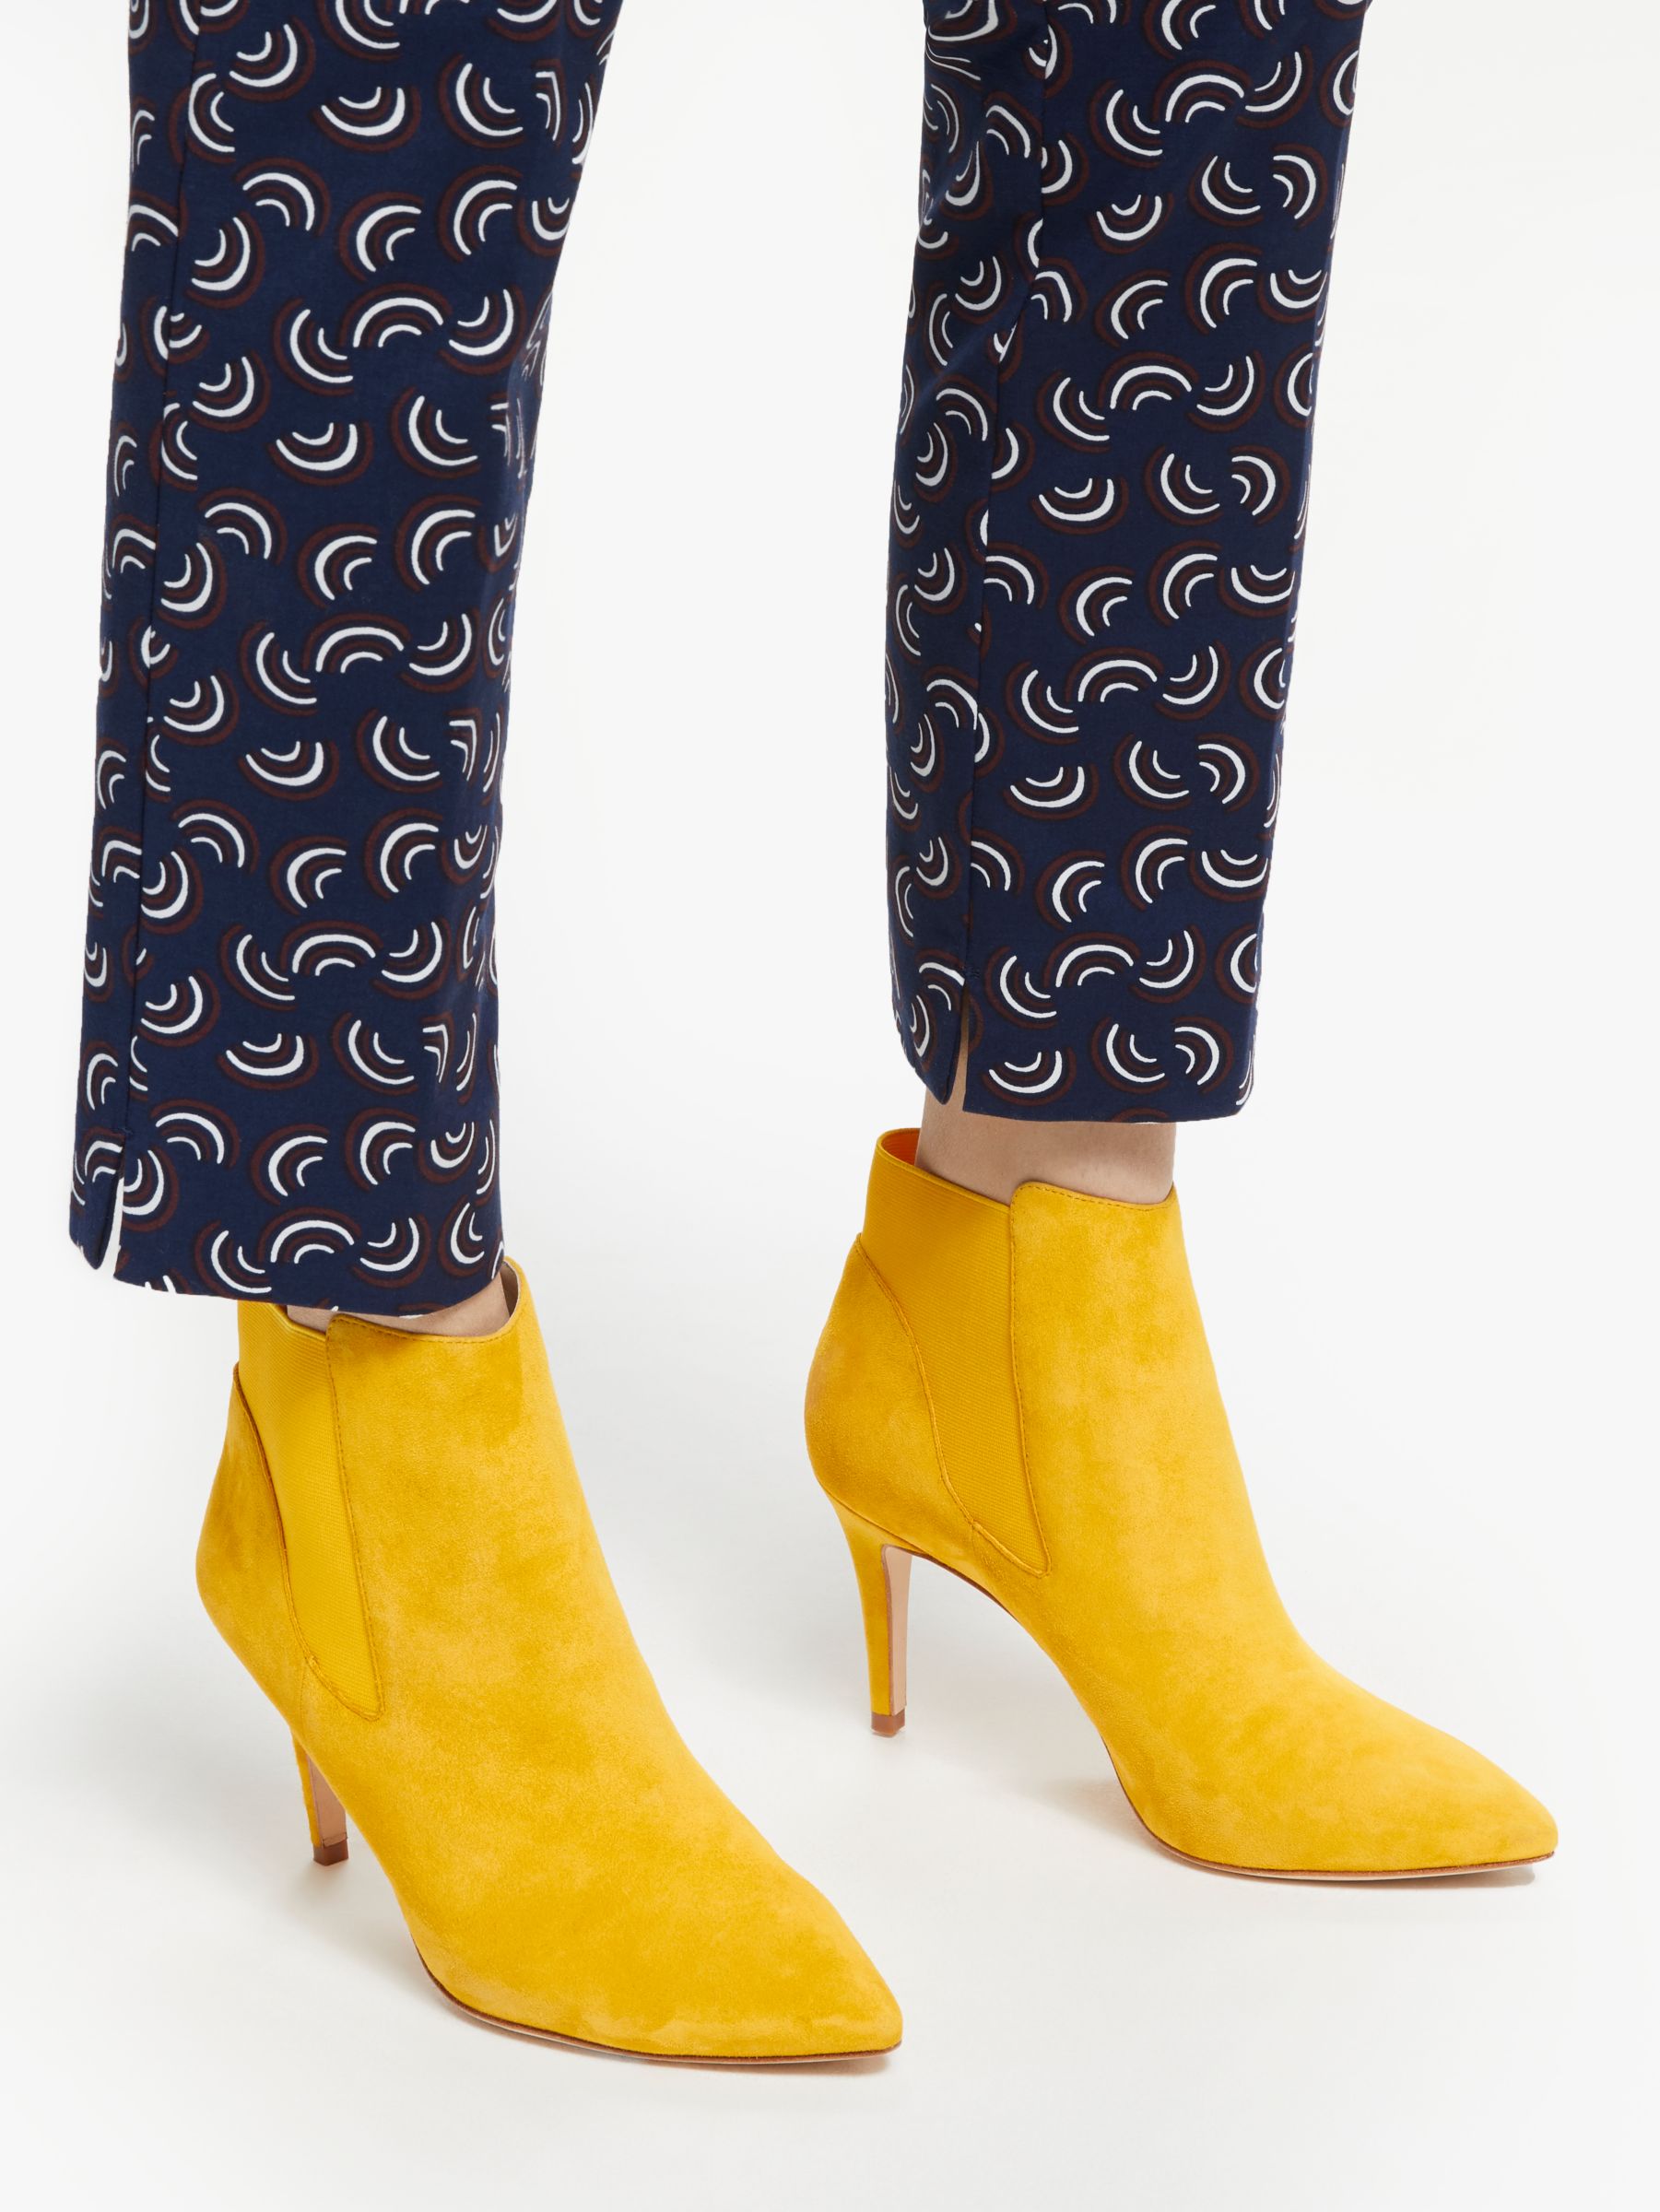 yellow suede boots ladies